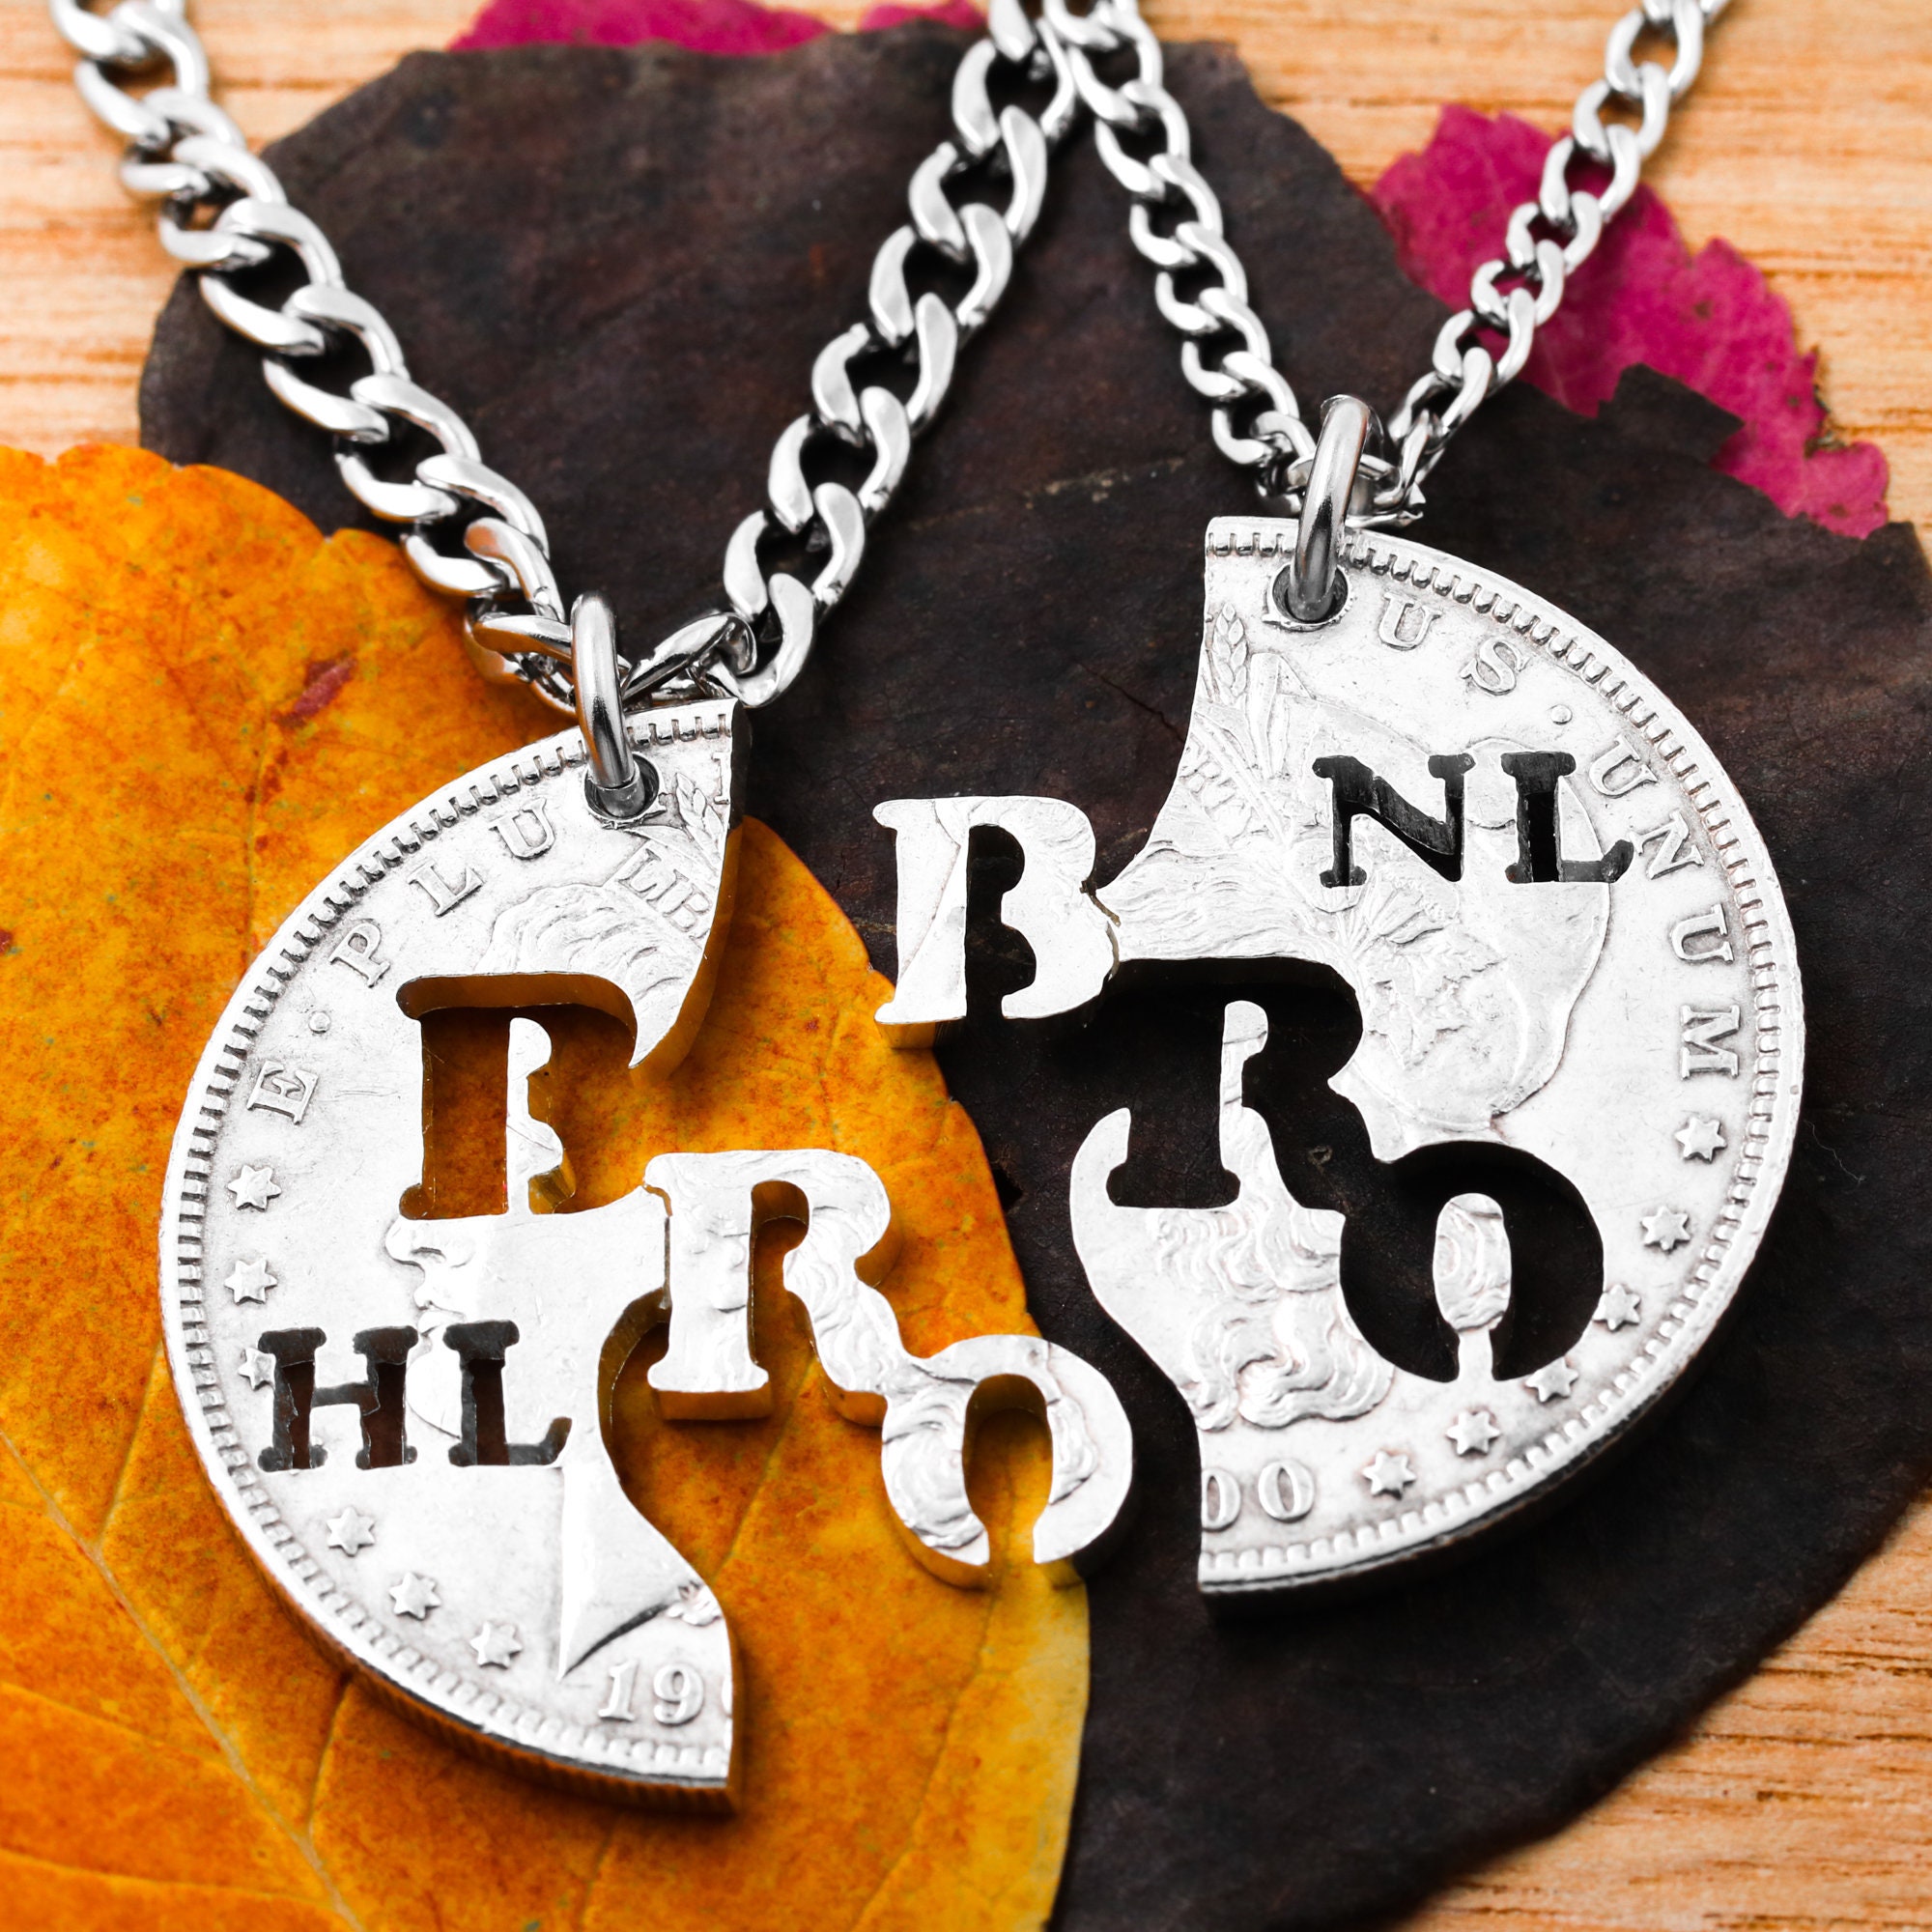 Brother BFF Necklaces, Custom Cut Initials, Best Friends Forever, Big Bro Little Bro, Siblings Jewelry, Interlocking Hand Cut Coin